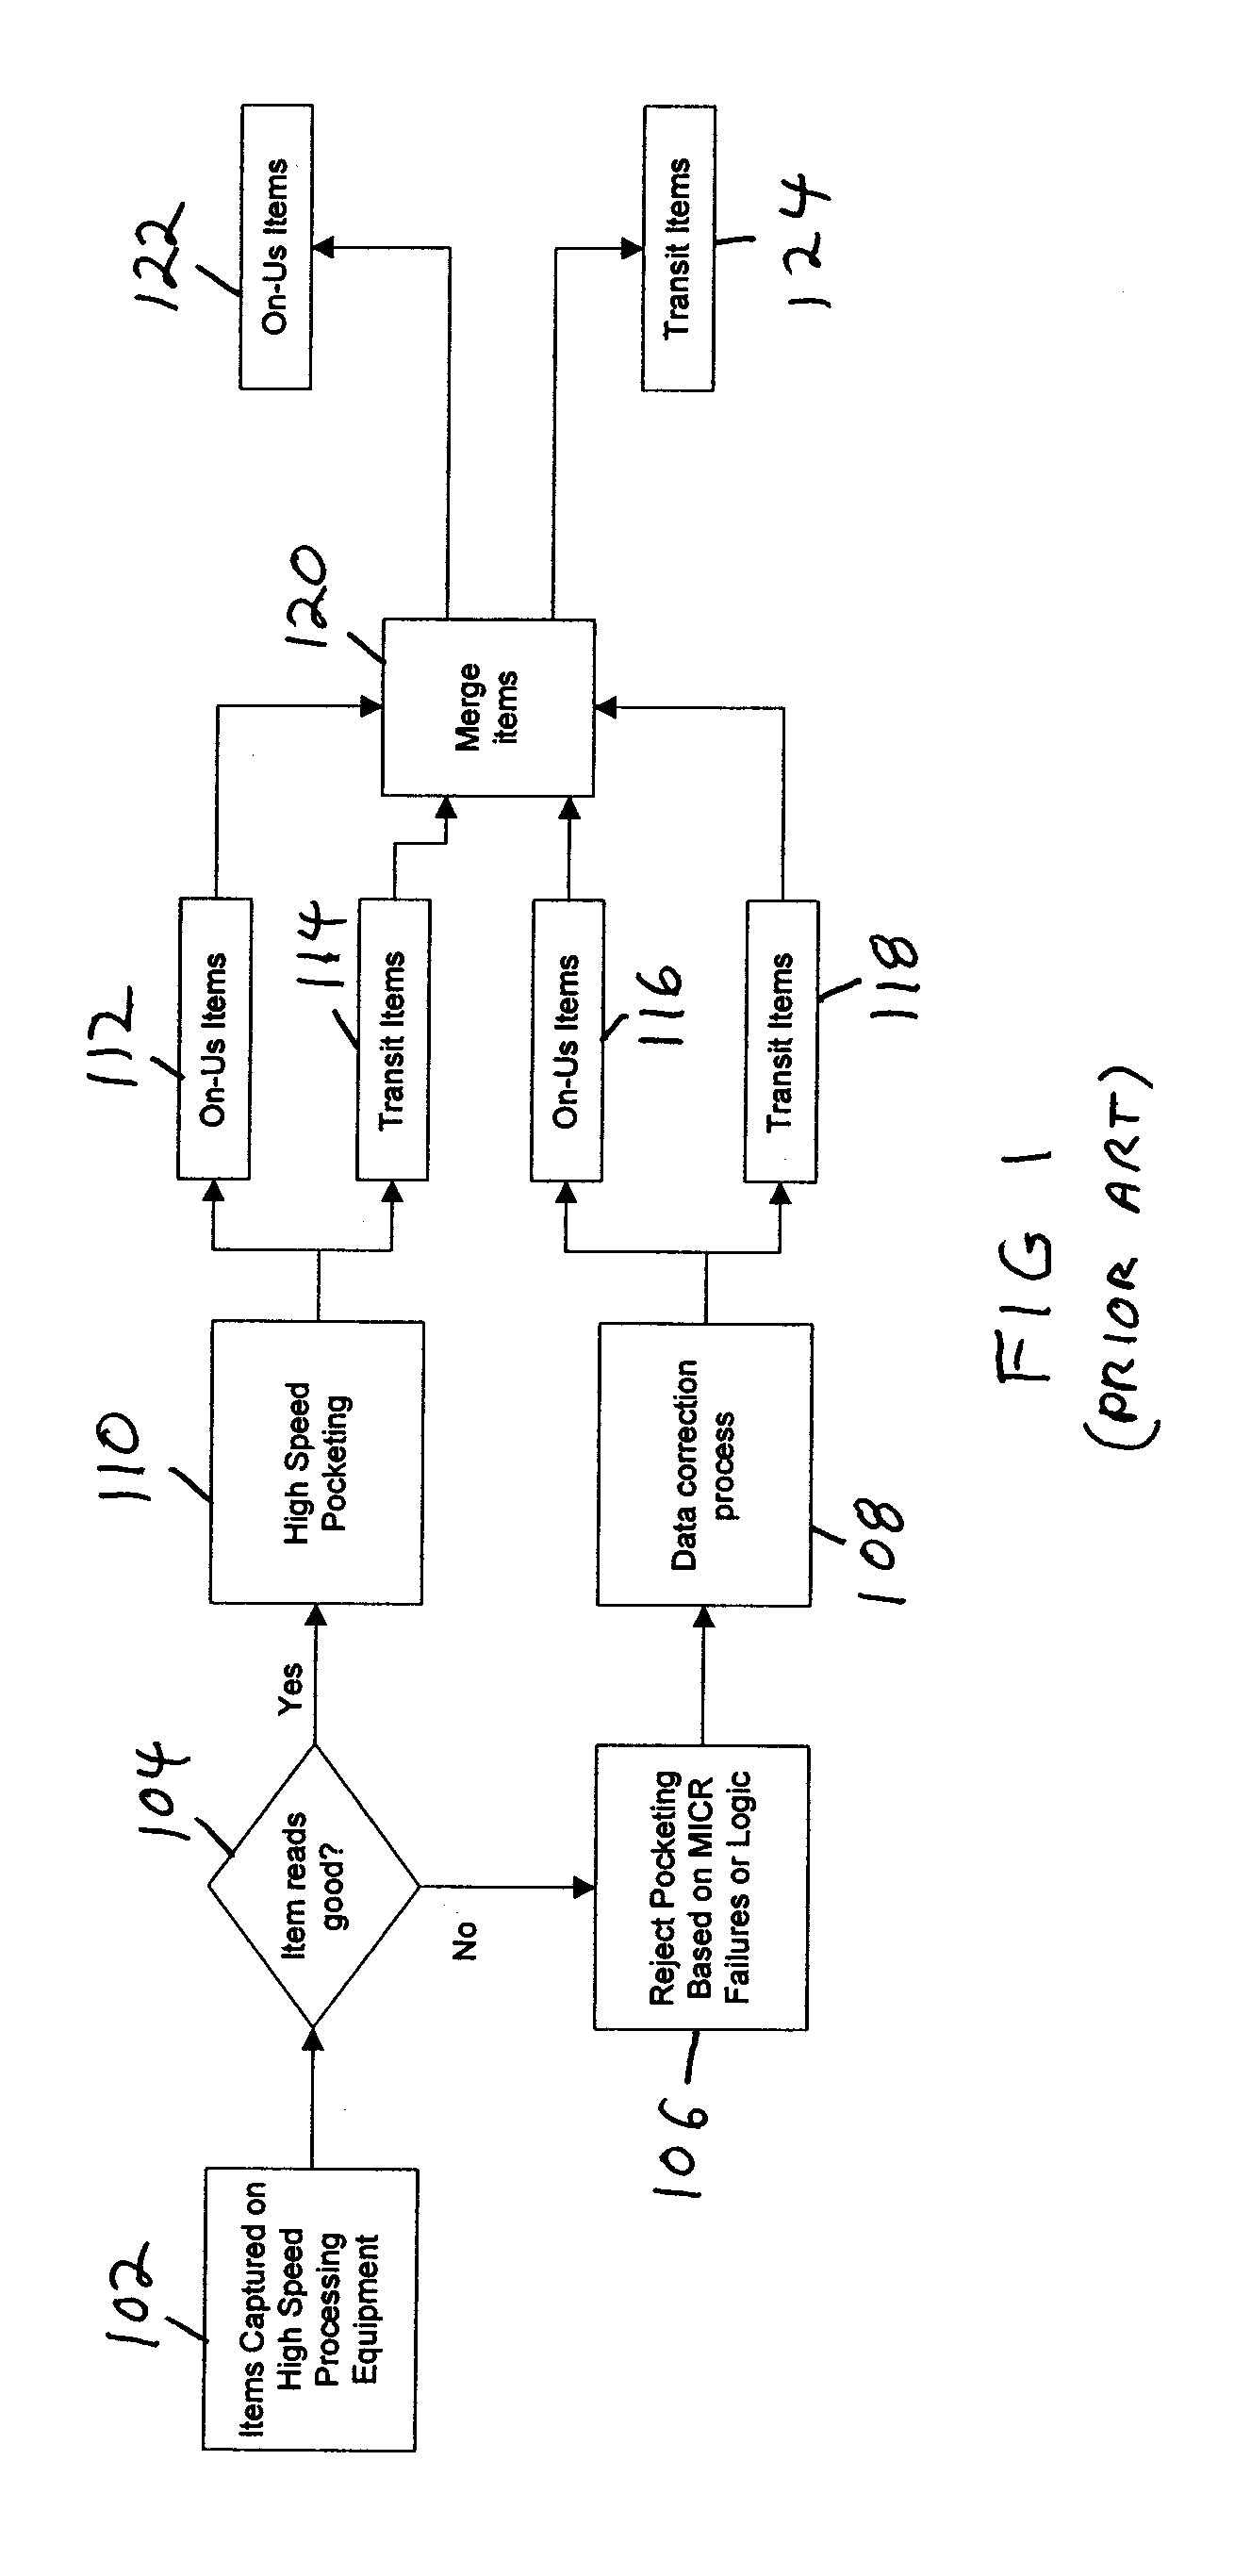 System and method for the processing of micr documents that produce read errors